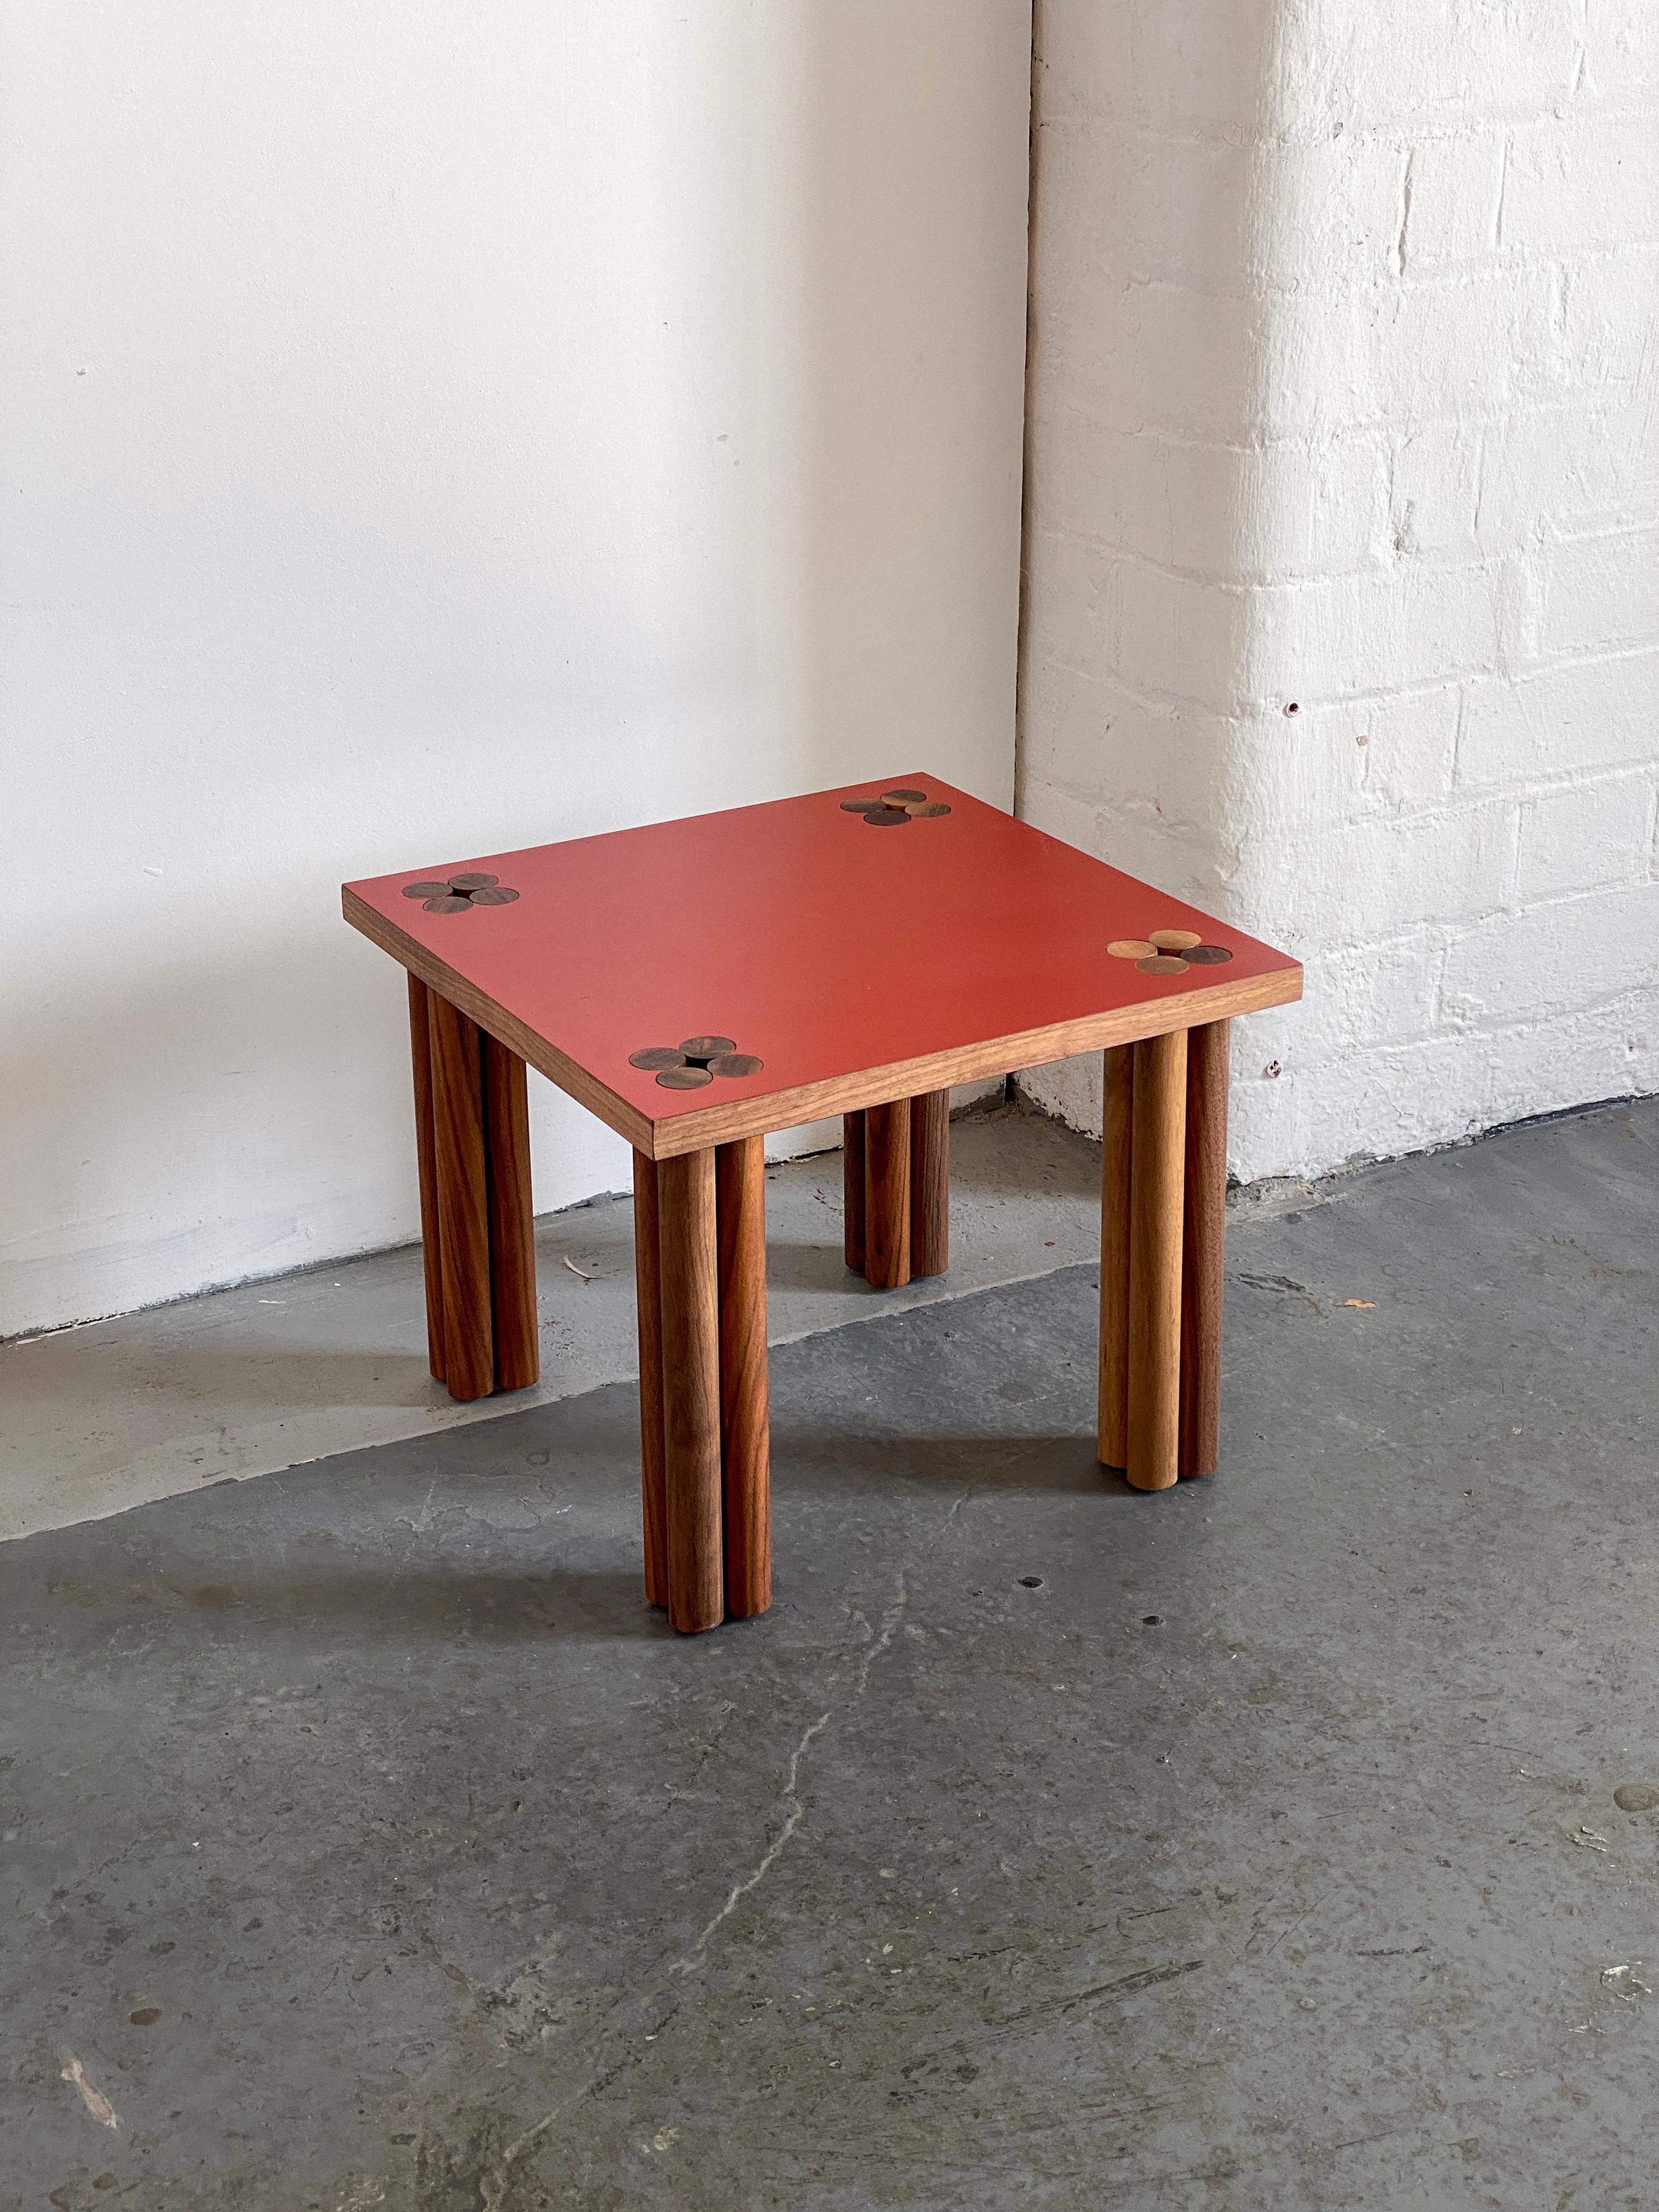 Red Hana side table by Tino Seubert.
Dimensions: D 43 x W 38 x H 50 cm. 
Materials: Solid walnut wood, walnut veneer, Formica.
Oak or other wood possible. 

Tino Seubert
When he first made his now signature wicker and aluminium stools and